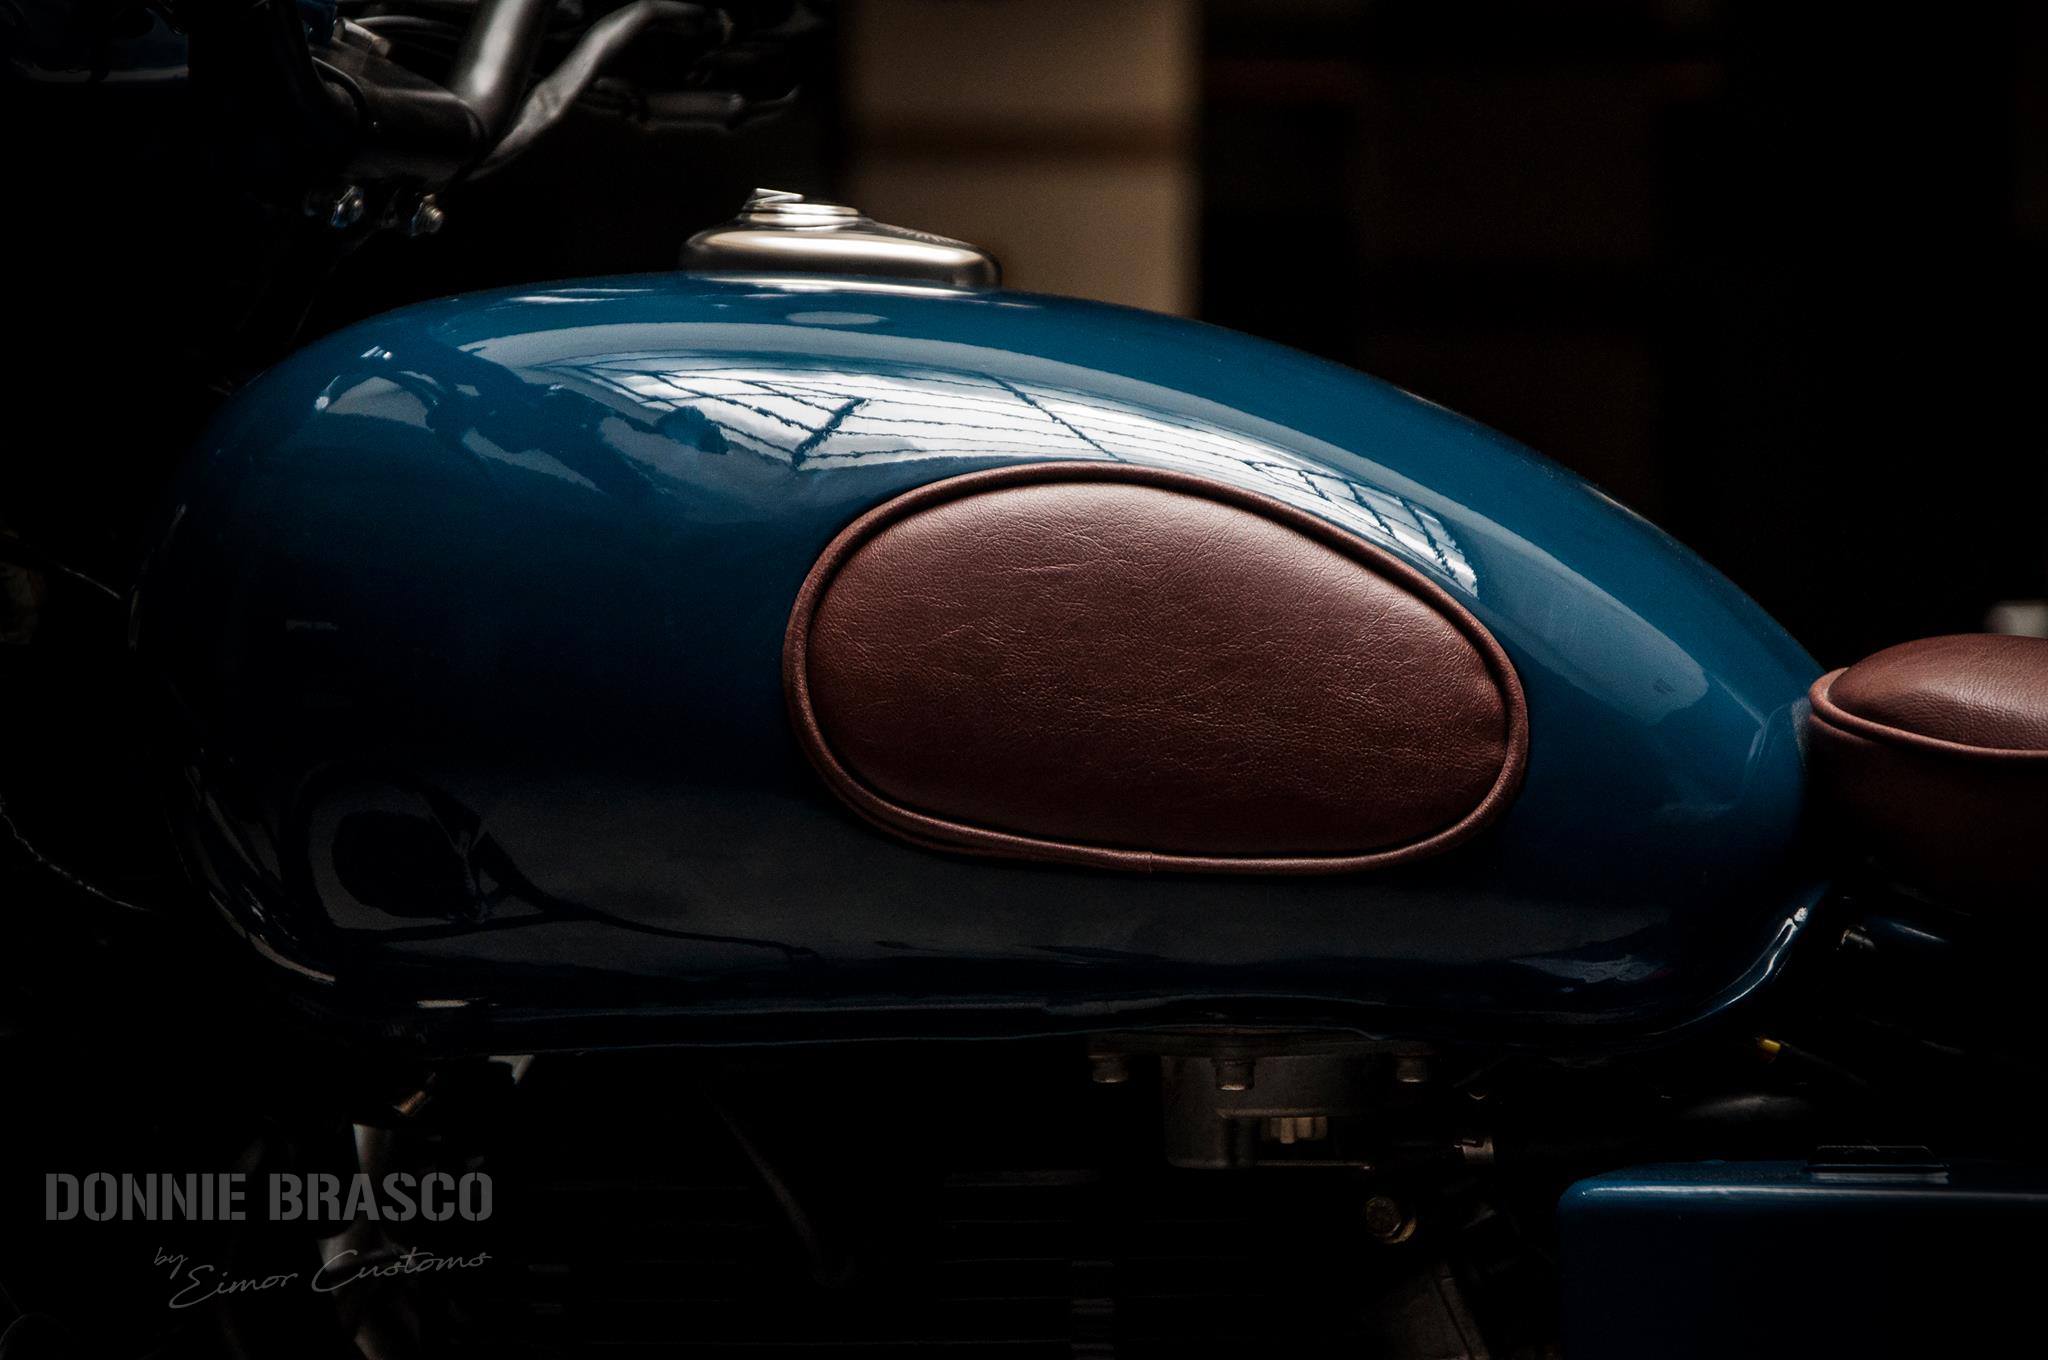 EIMOR Royal Enfield Classic 'Donnie Brasco' Details and Photos - close-up